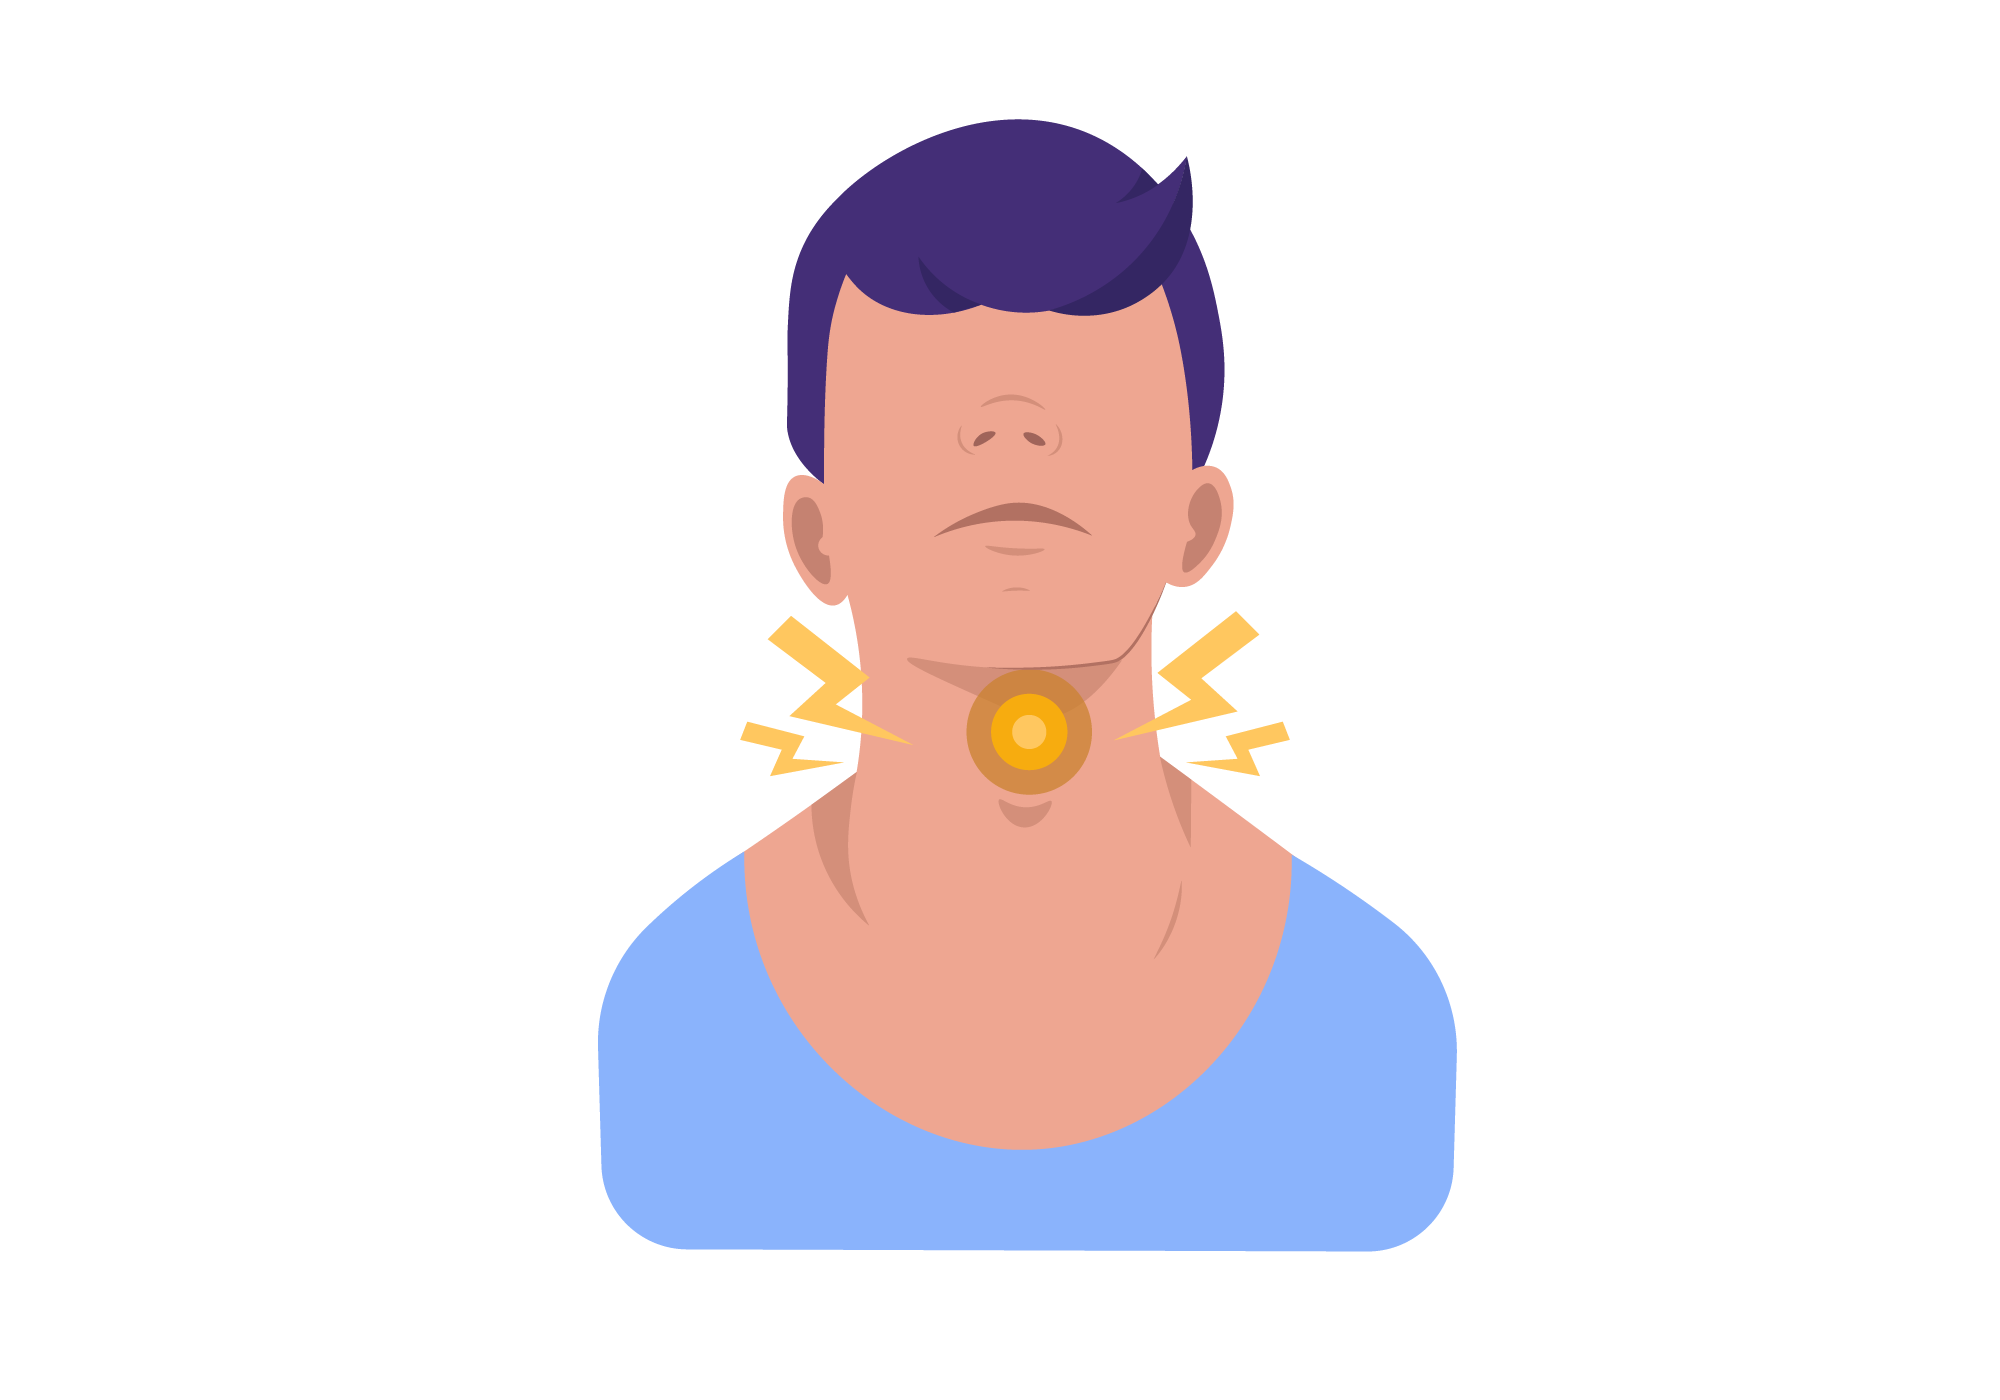 Adam's Apple Pain | Causes & Treatments for Pain Over Adam's Apple